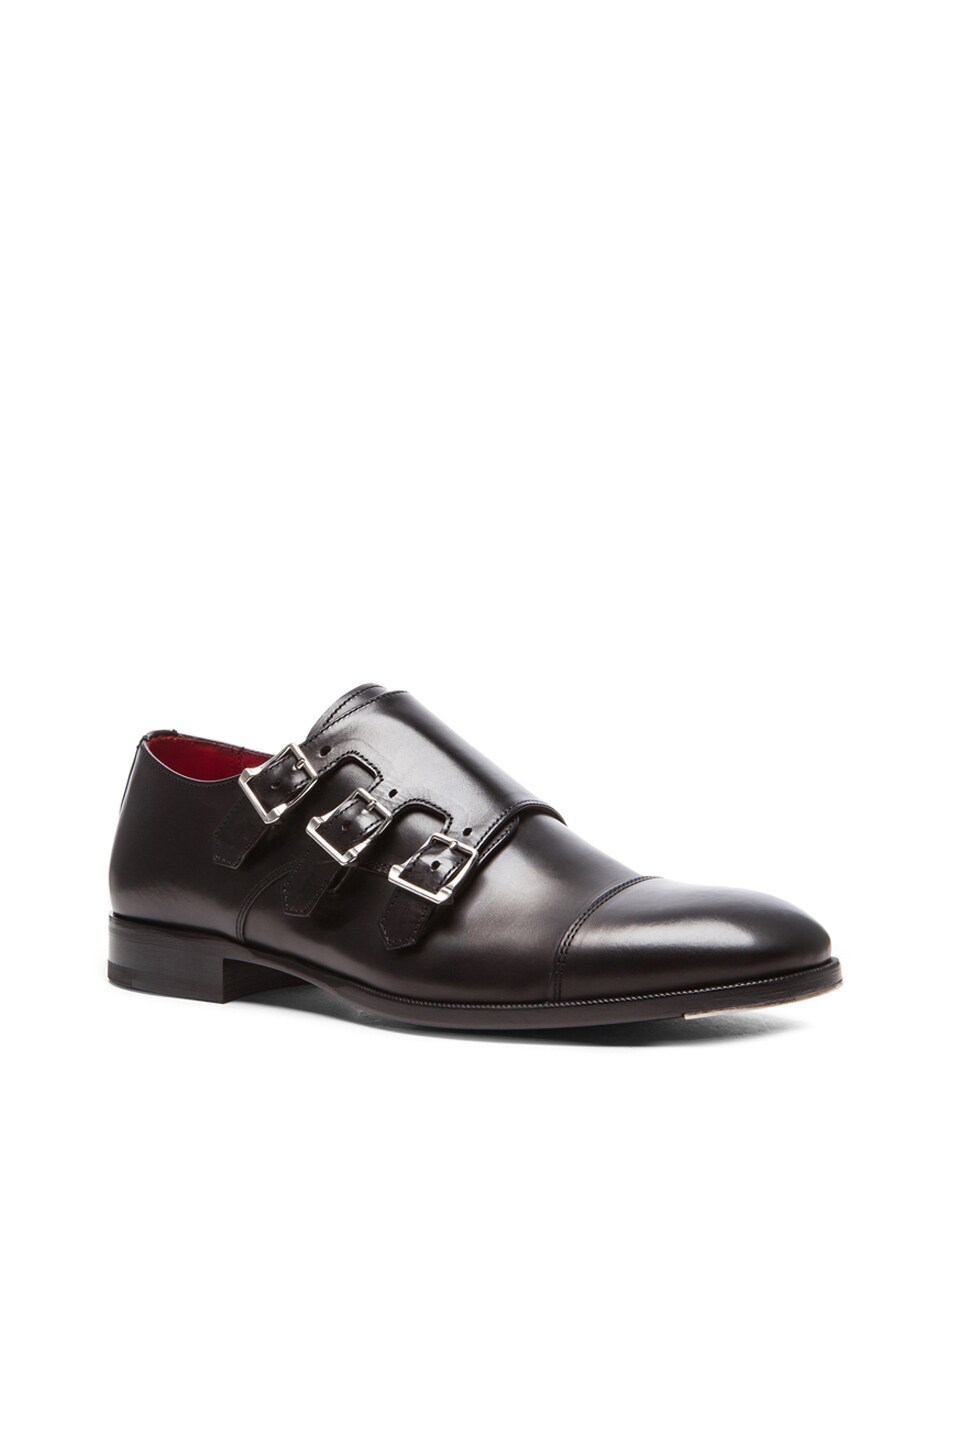 Image 1 of Alexander McQueen Three Buckle Leather Shoes in Black